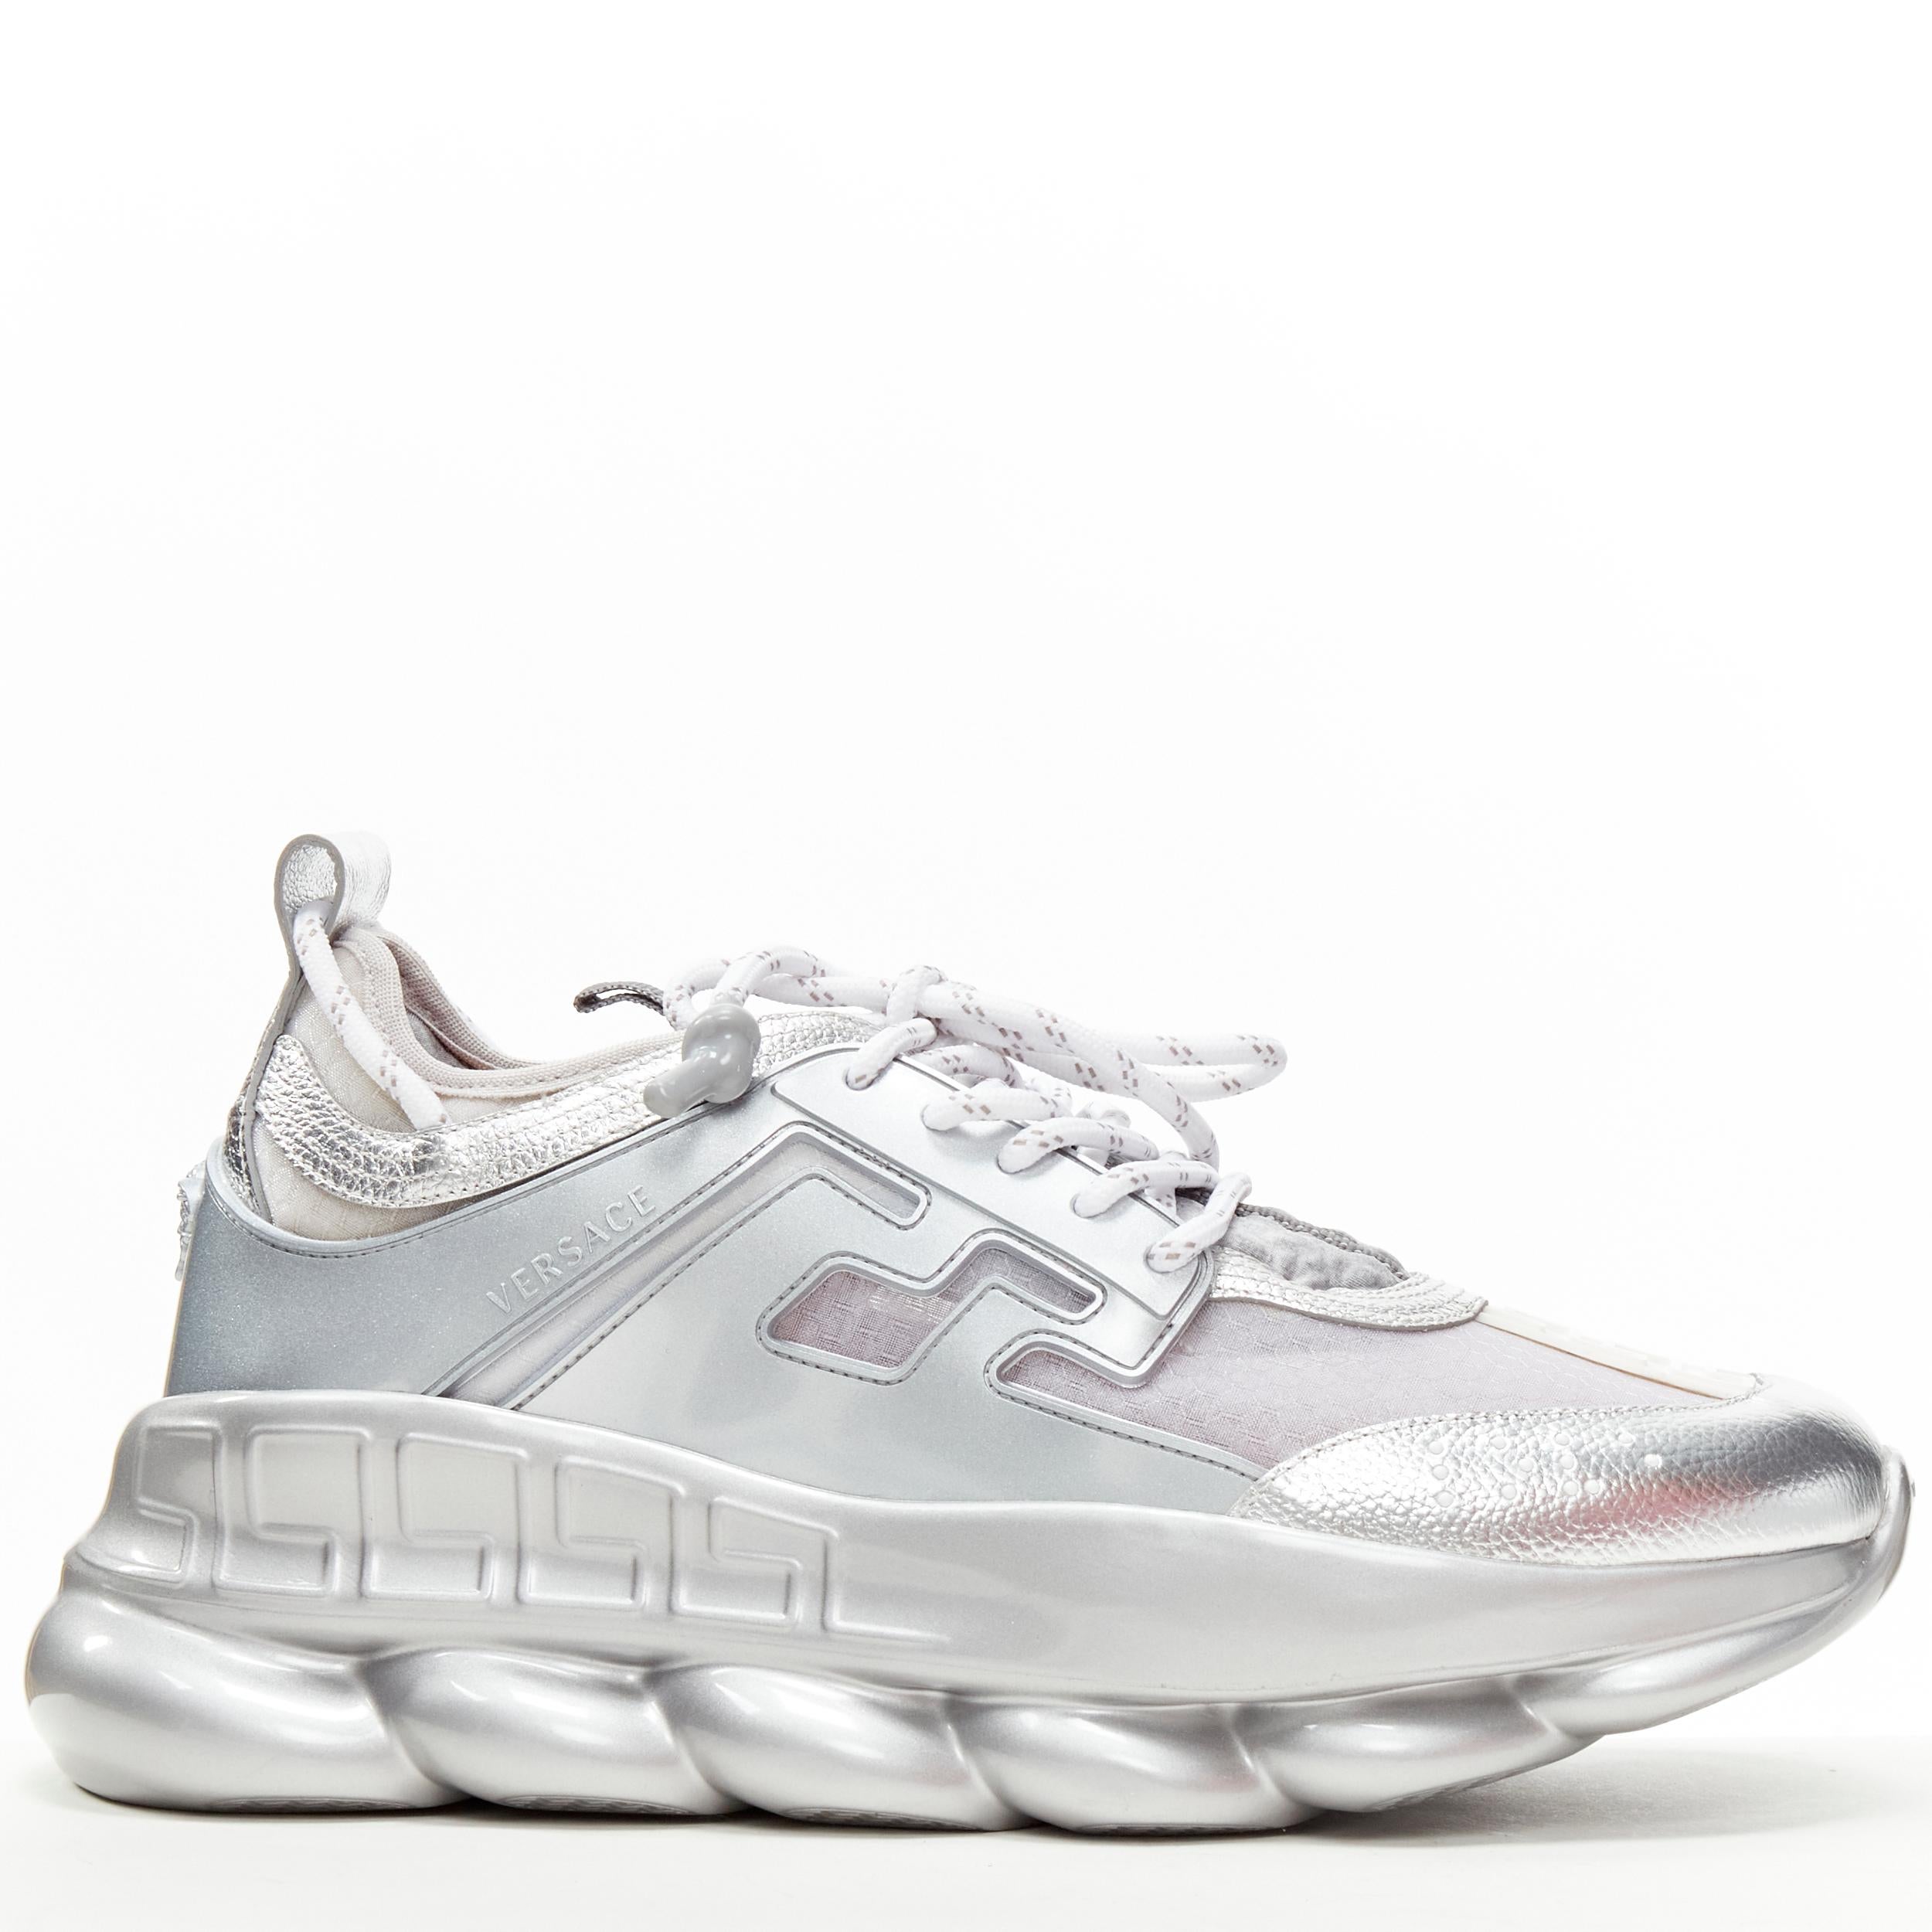 new VERSACE Chain Reaction metallic silver sheer low top chunky sneaker EU45 
Reference: TGAS/C00776 
Brand: Versace 
Designer: Donatella Versace 
Model: DSU7071E D10TCG D9201 
Collection: Chain Reaction 
Material: Mesh 
Color: Silver 
Pattern: